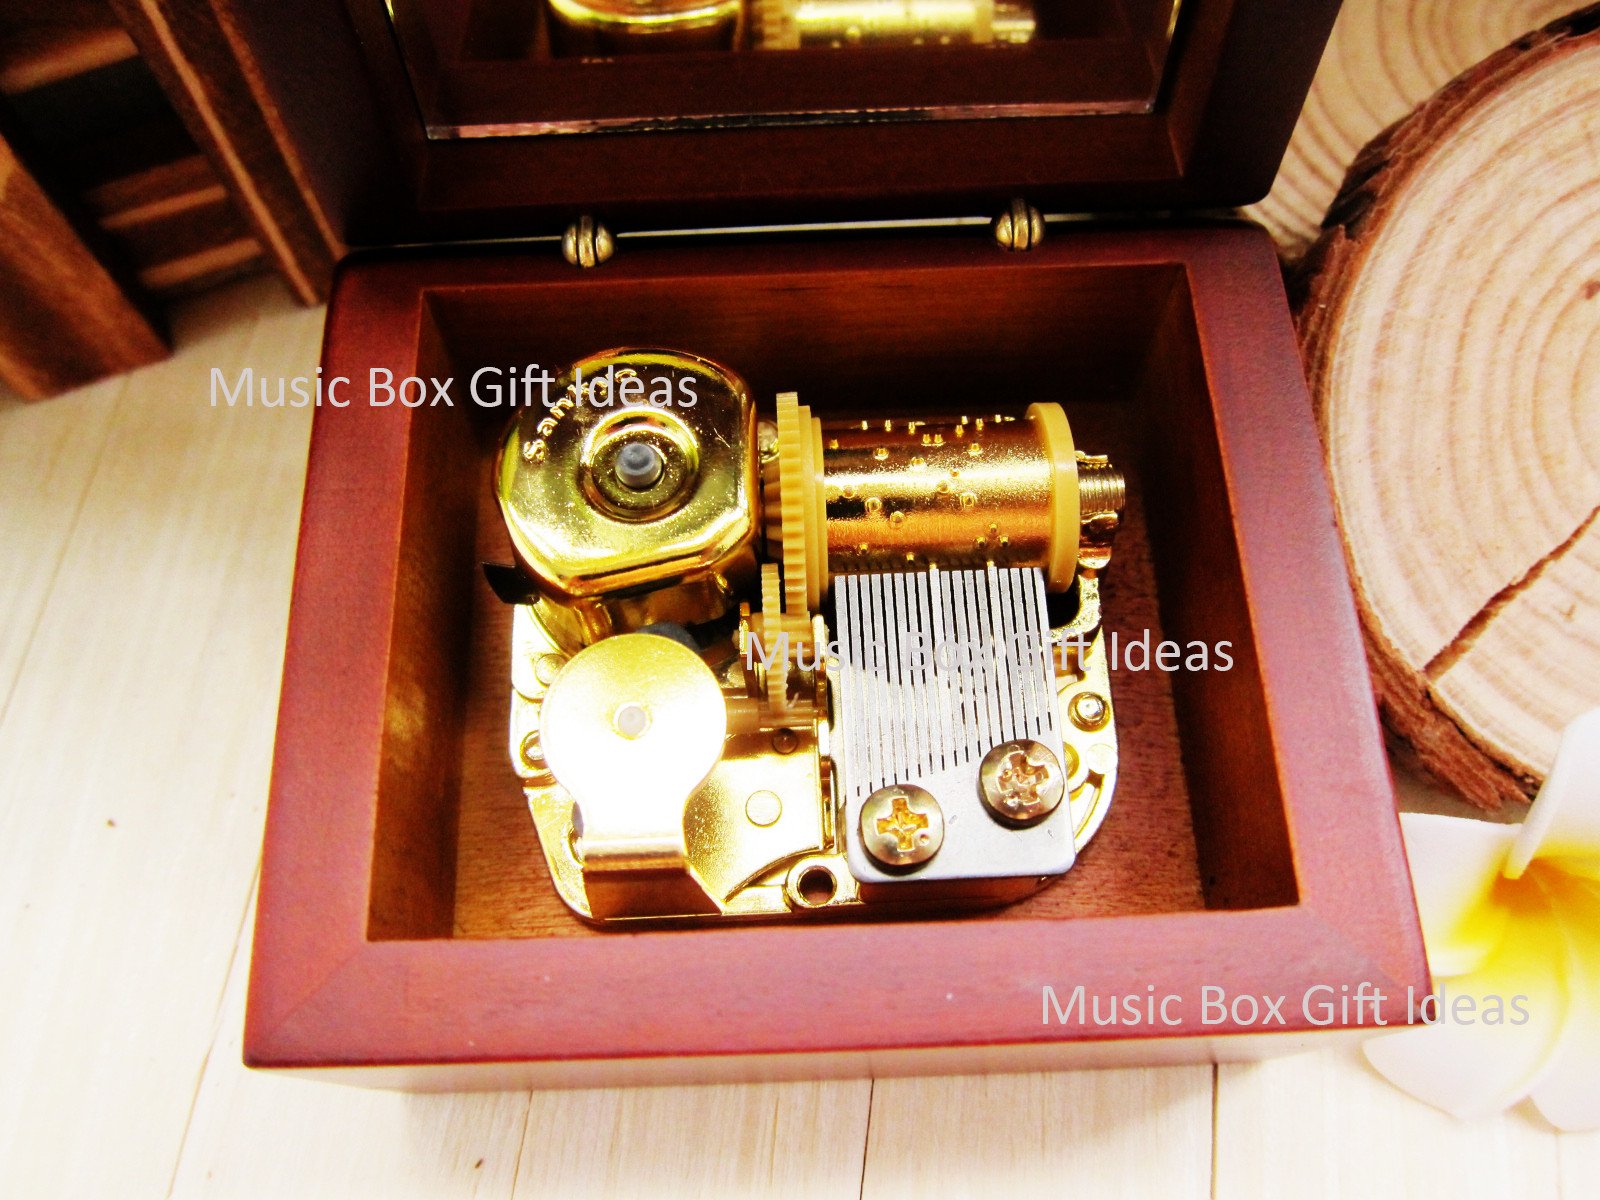 The Music Box You Program Yourself (making a song) 